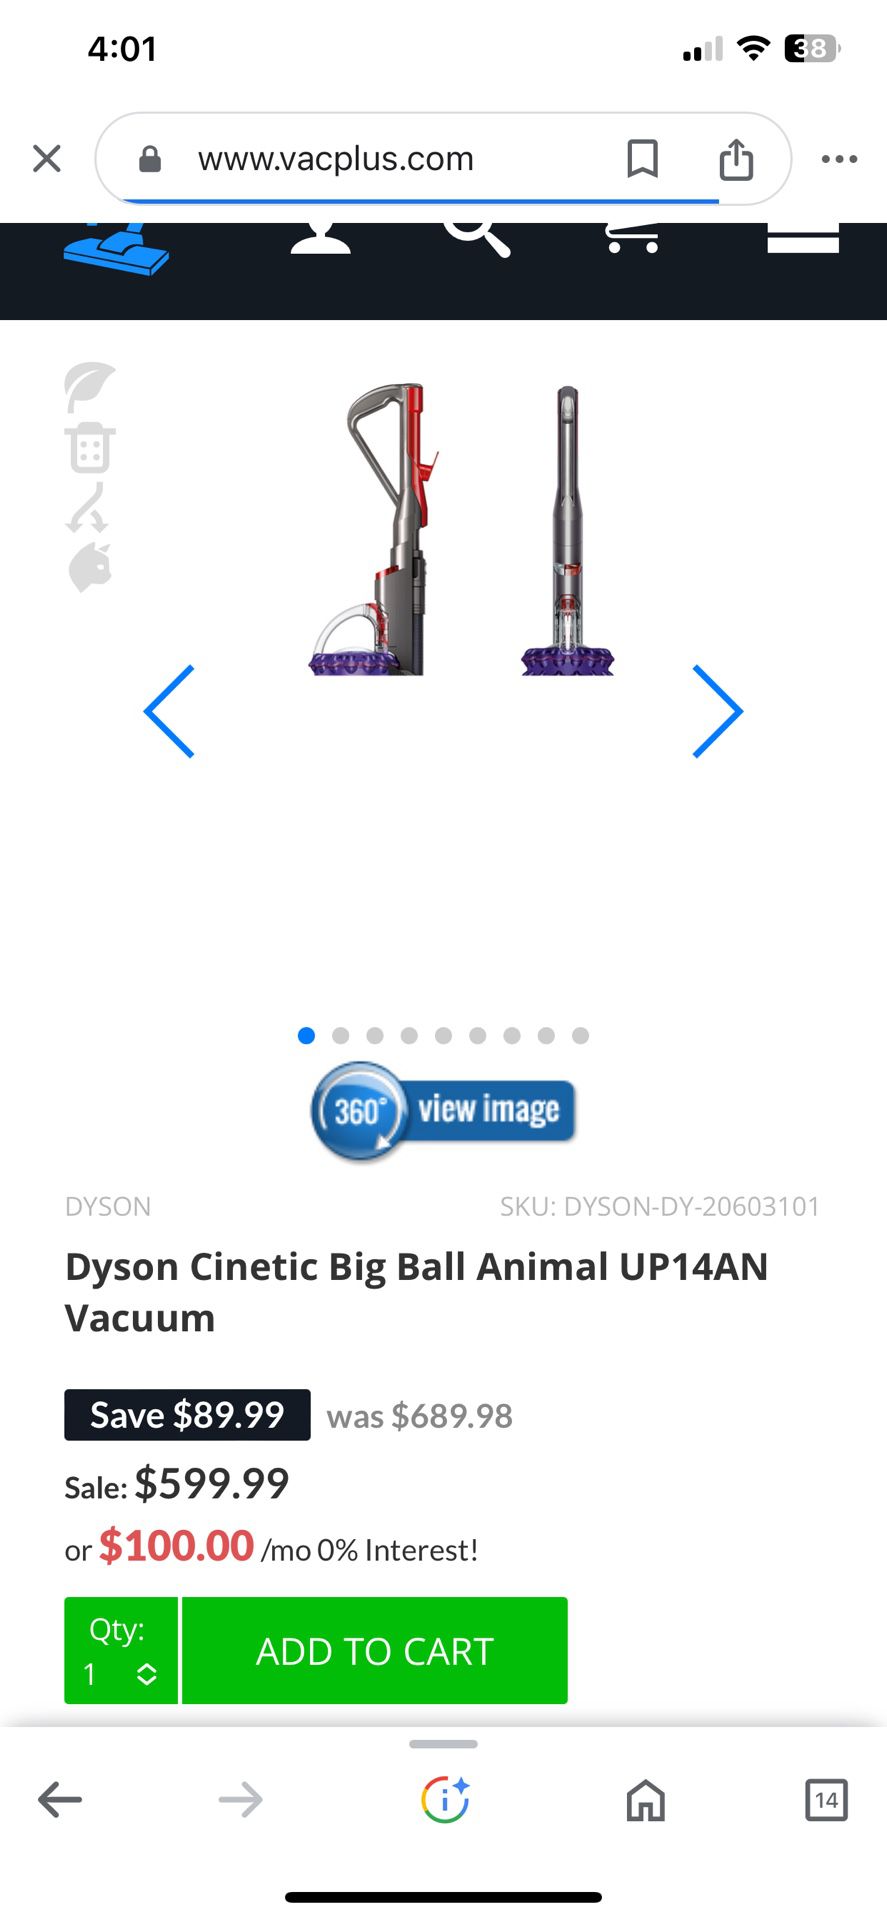 Dyson Cinetic Big Ball Animal Vacuum Cleaner Great Condition